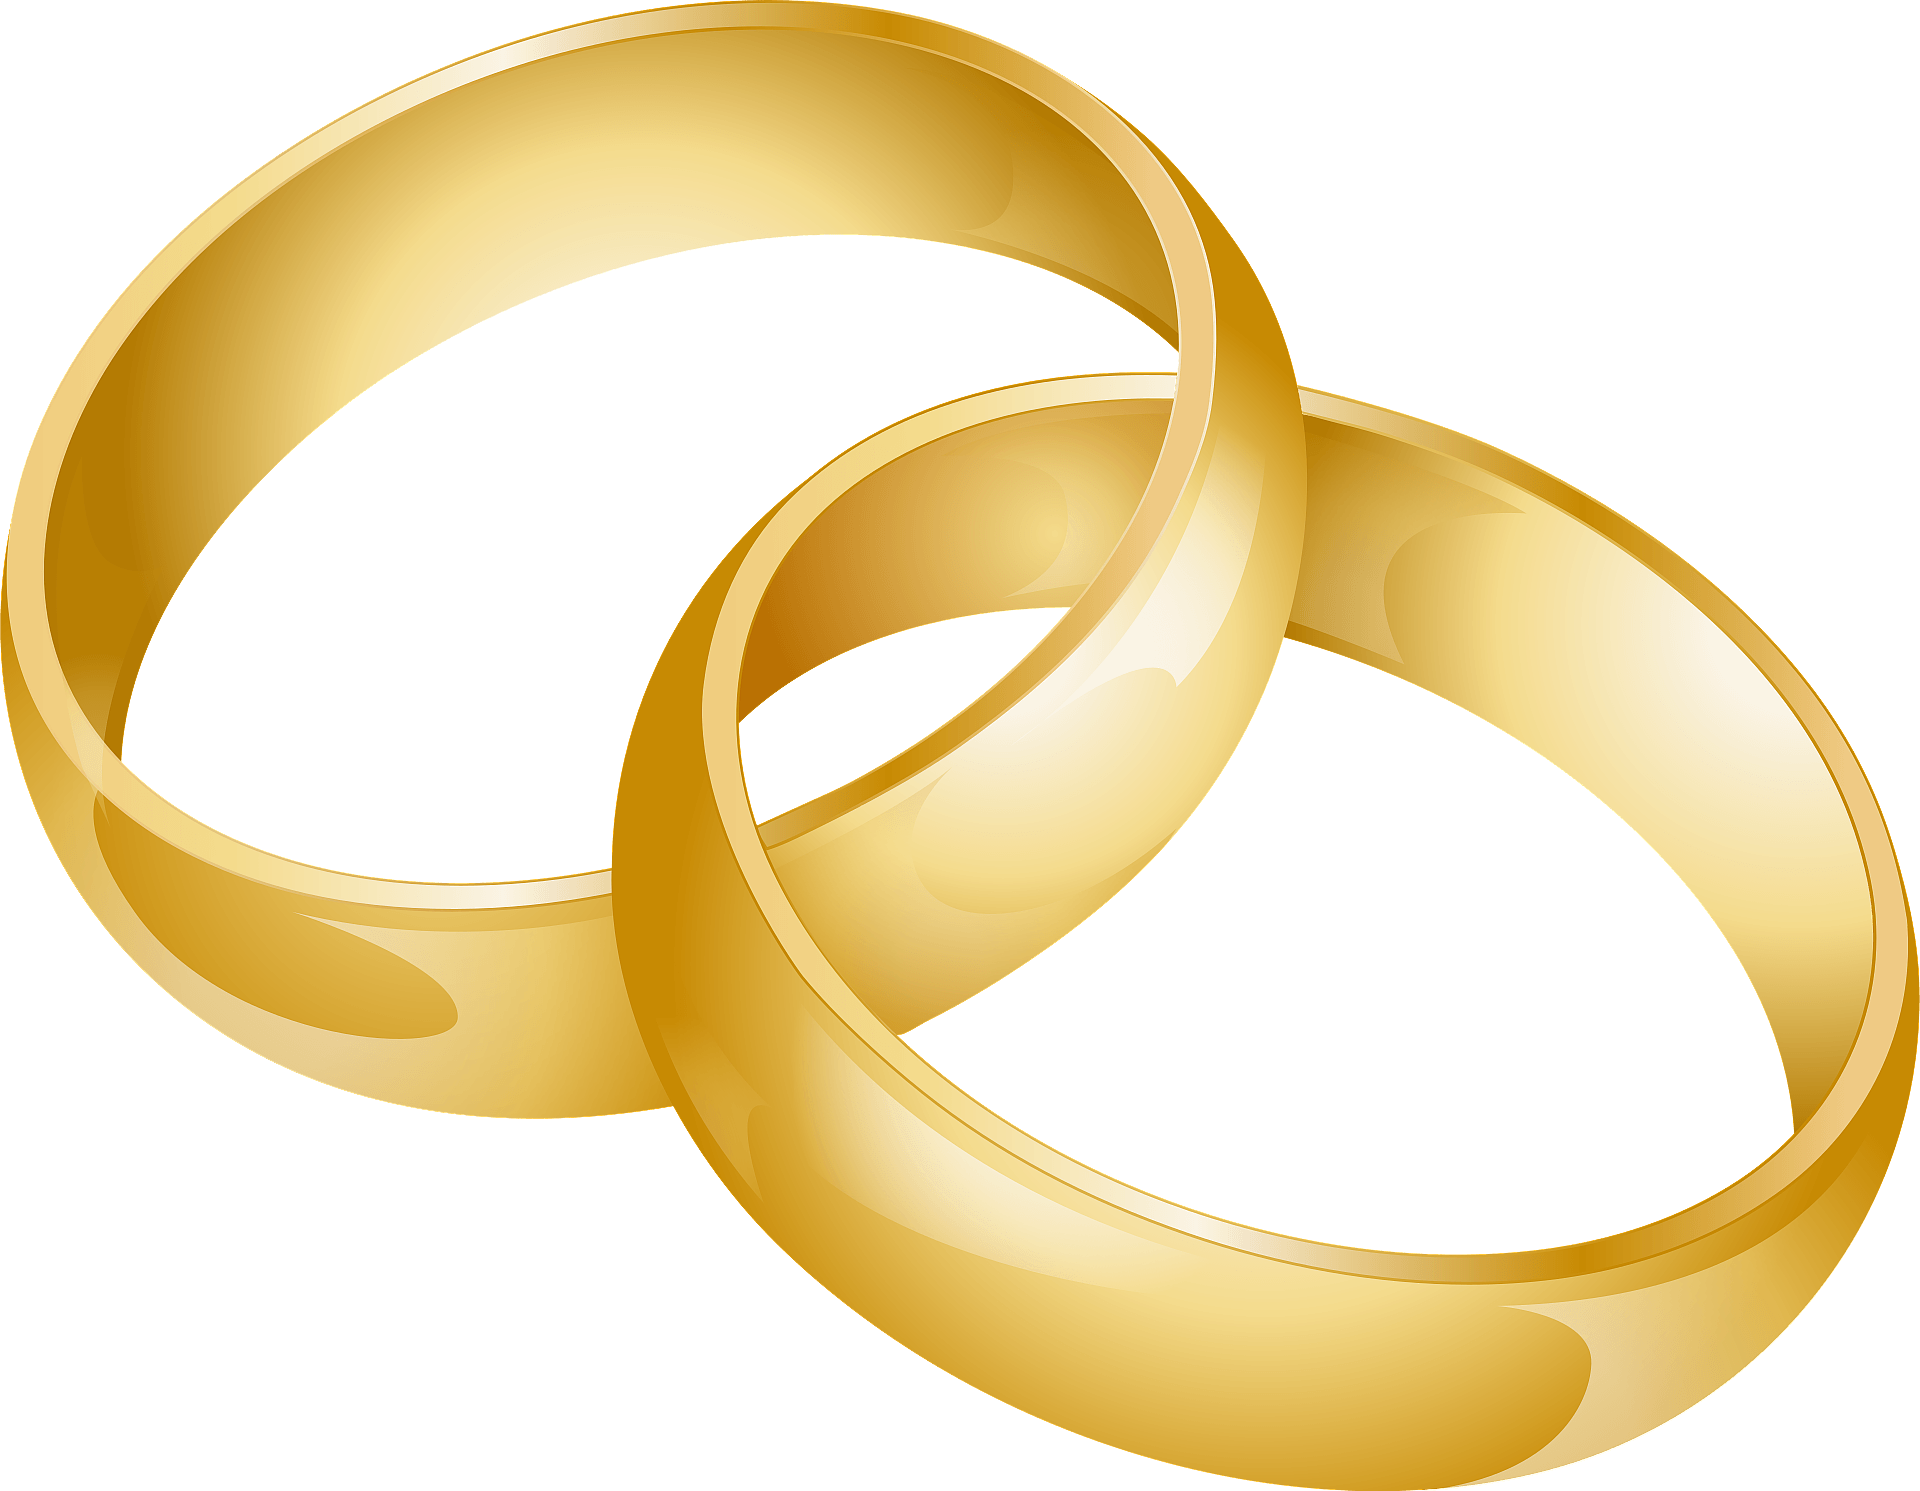 Wedding Rings with Diamond Overlapping Clipart Digital Download SVG PNG JPG  PDF Cut Files